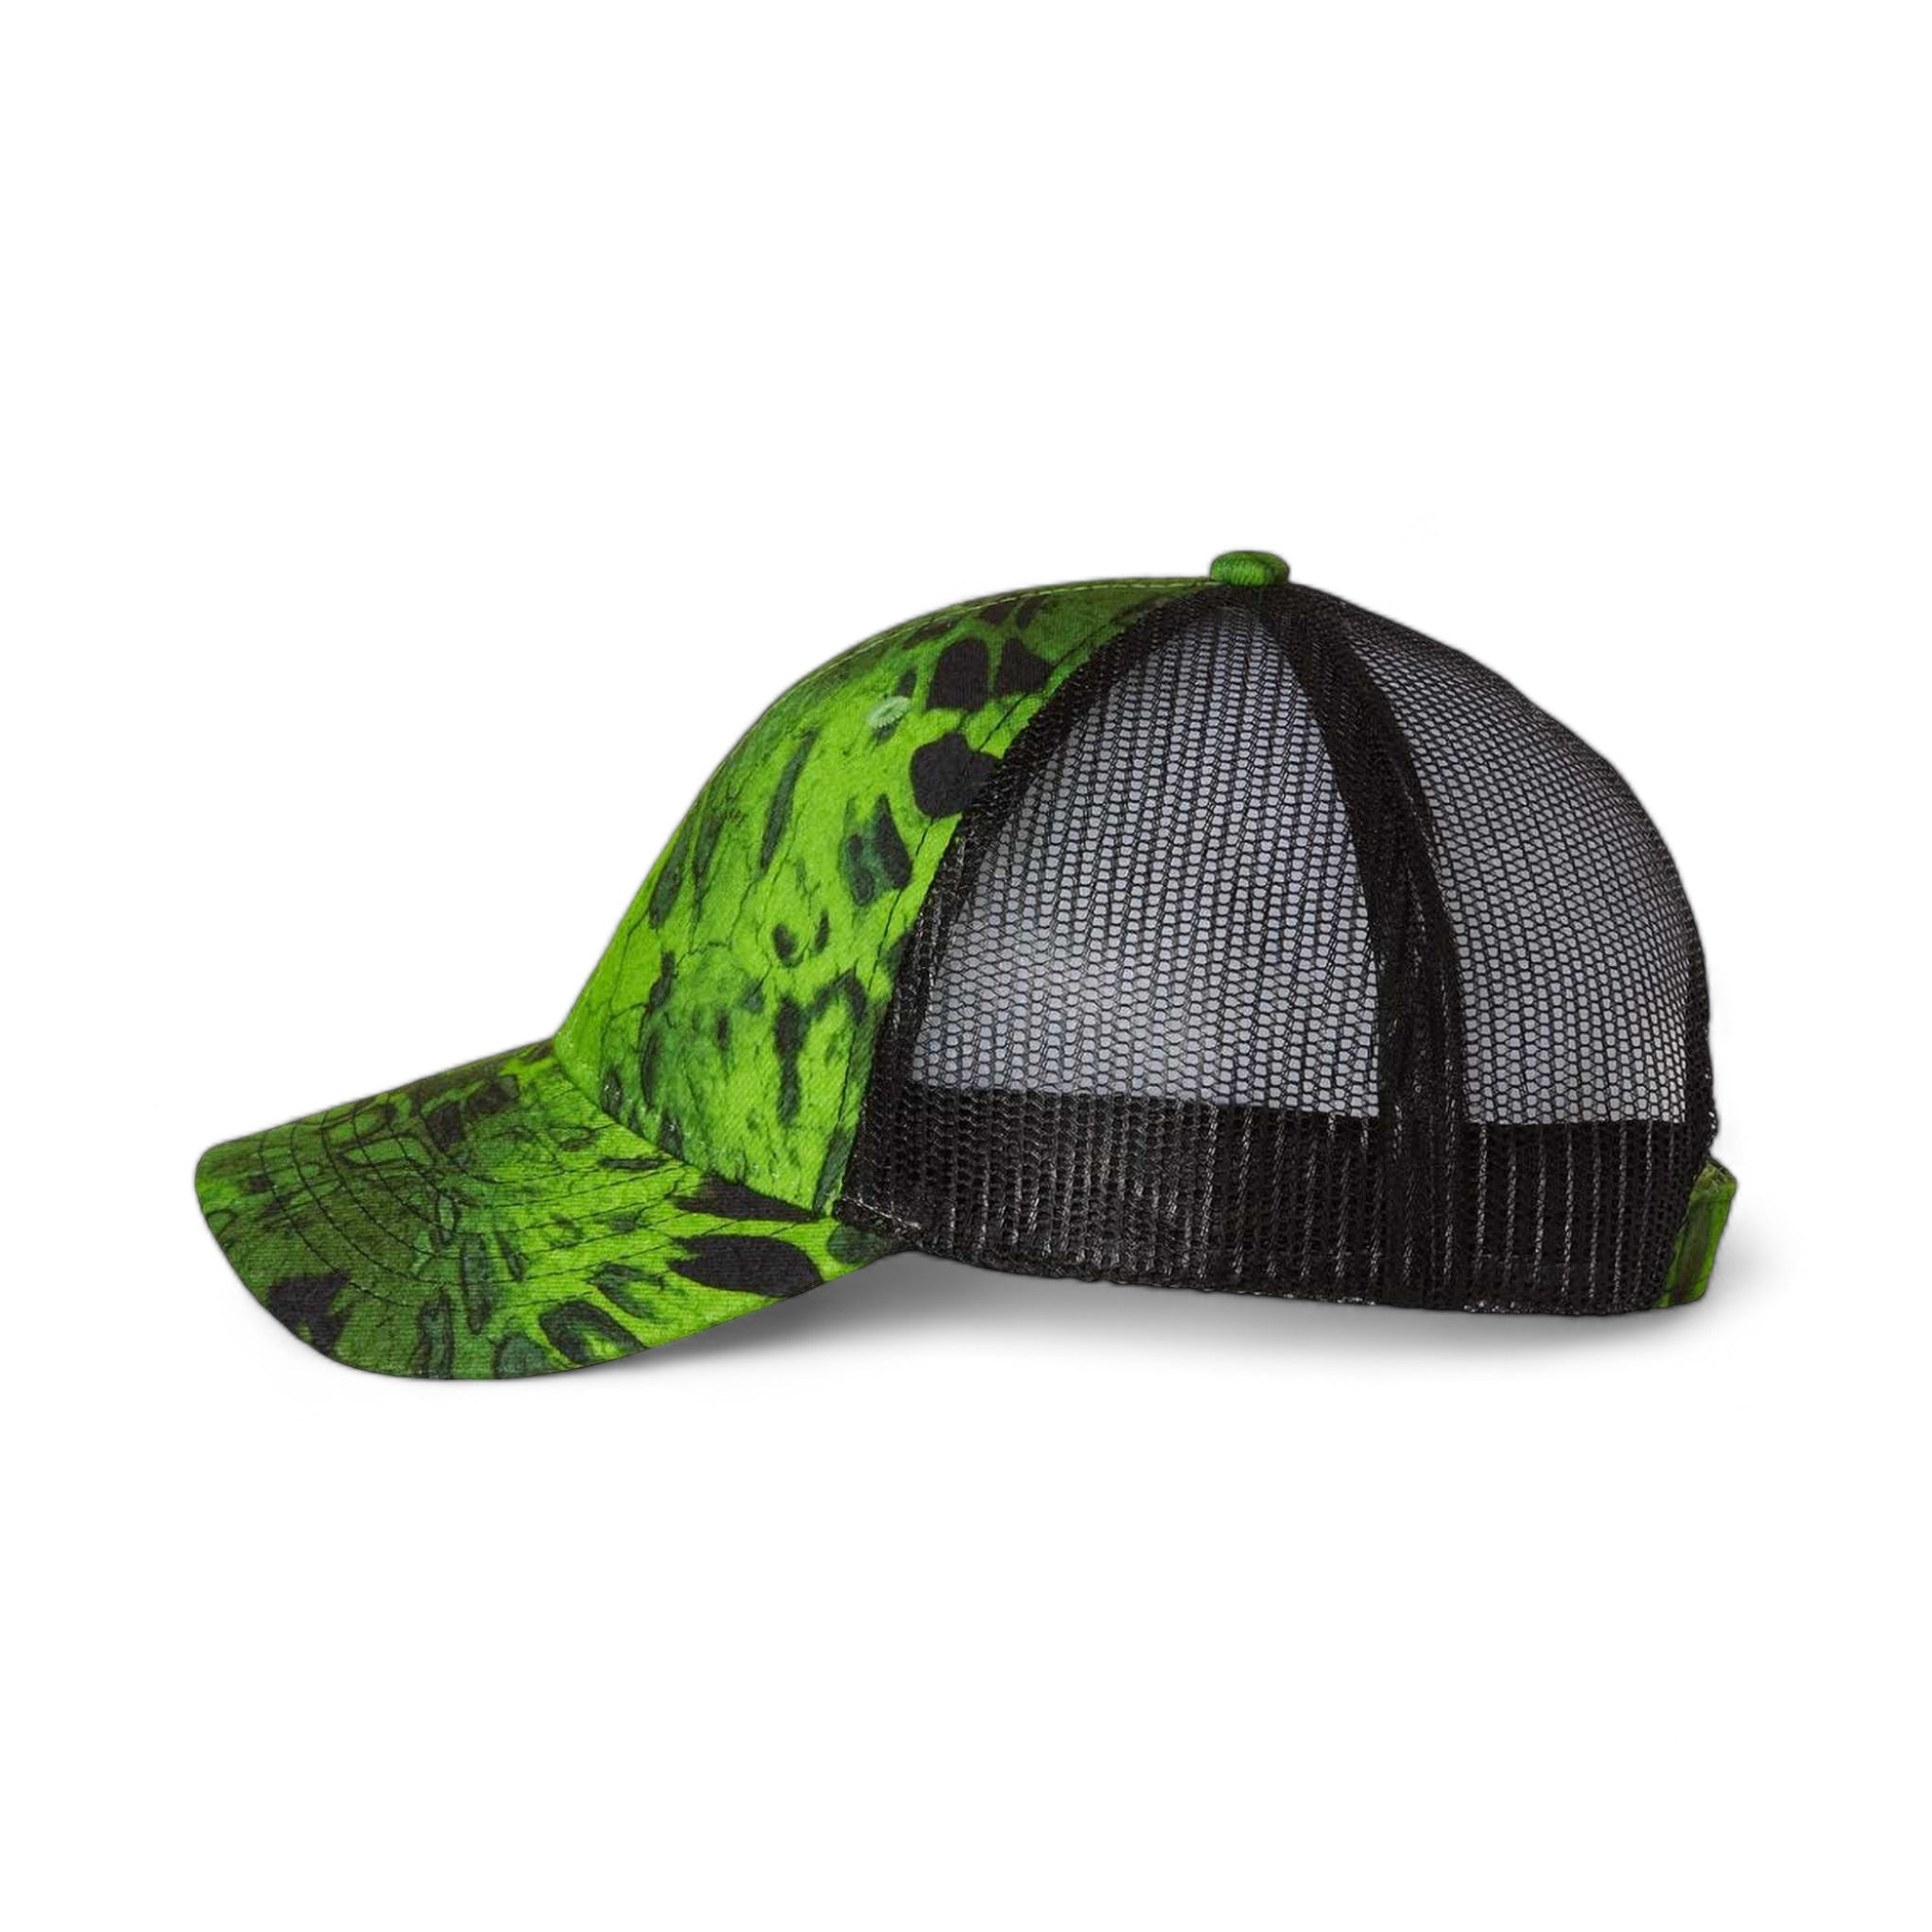 Side view of Kati LC5M custom hat in prym1 amped green and black